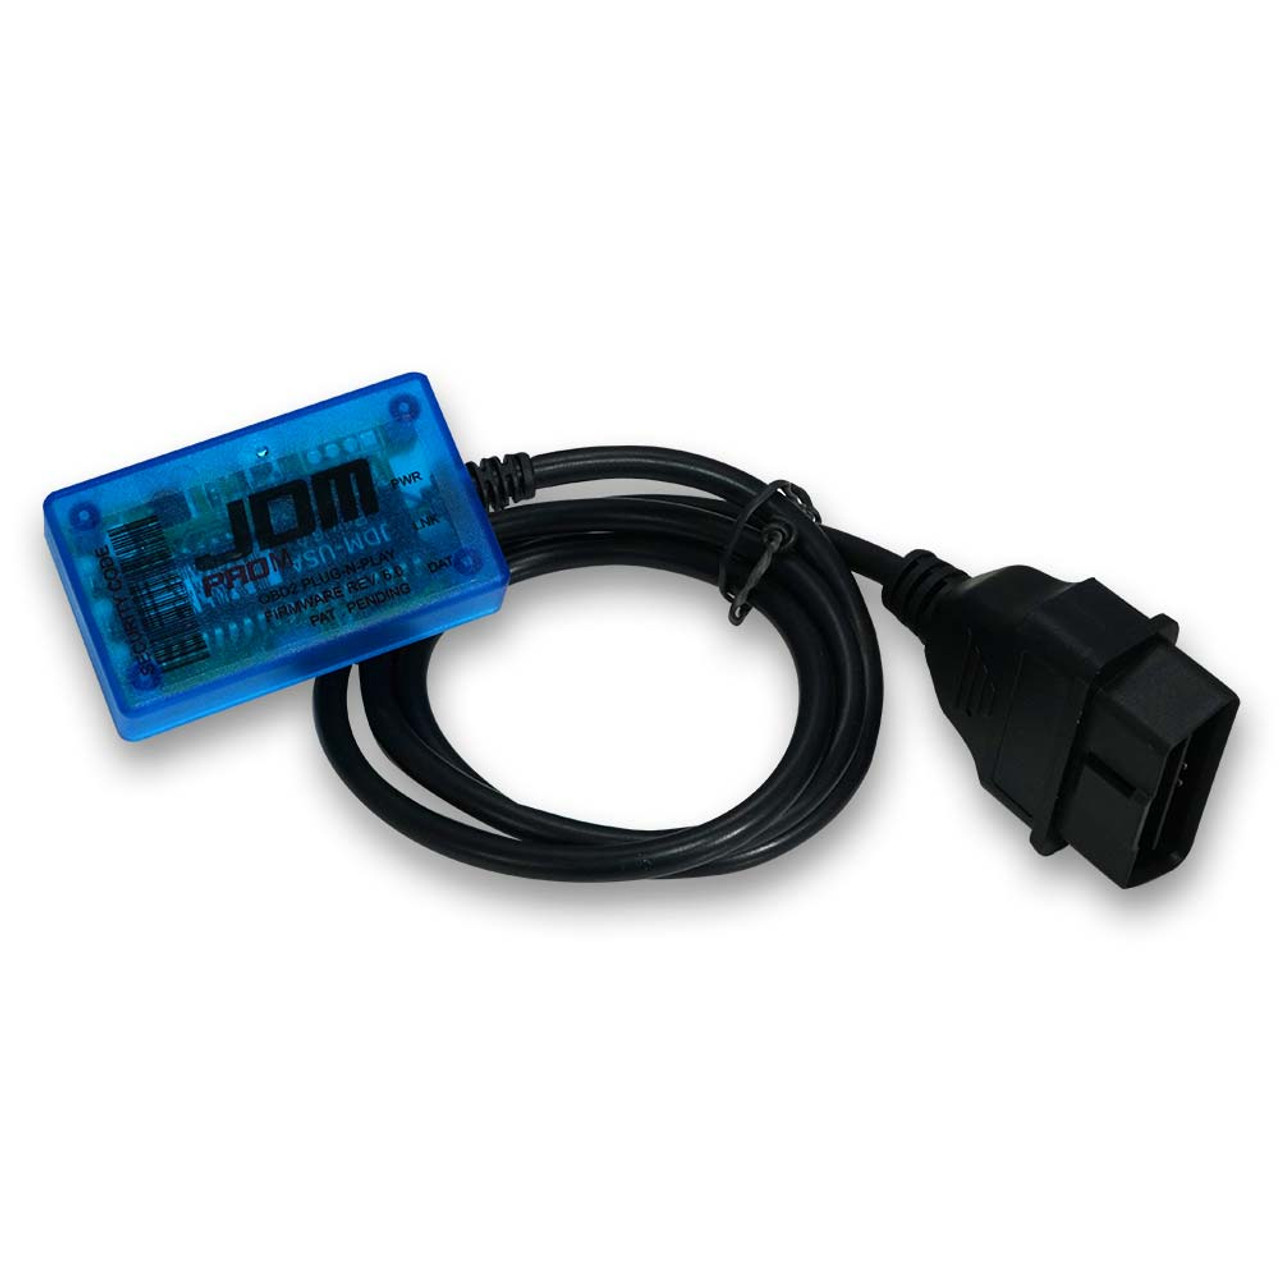 Power Tuner Performance Tuning Chip For 2005 Dodge Ram 3500